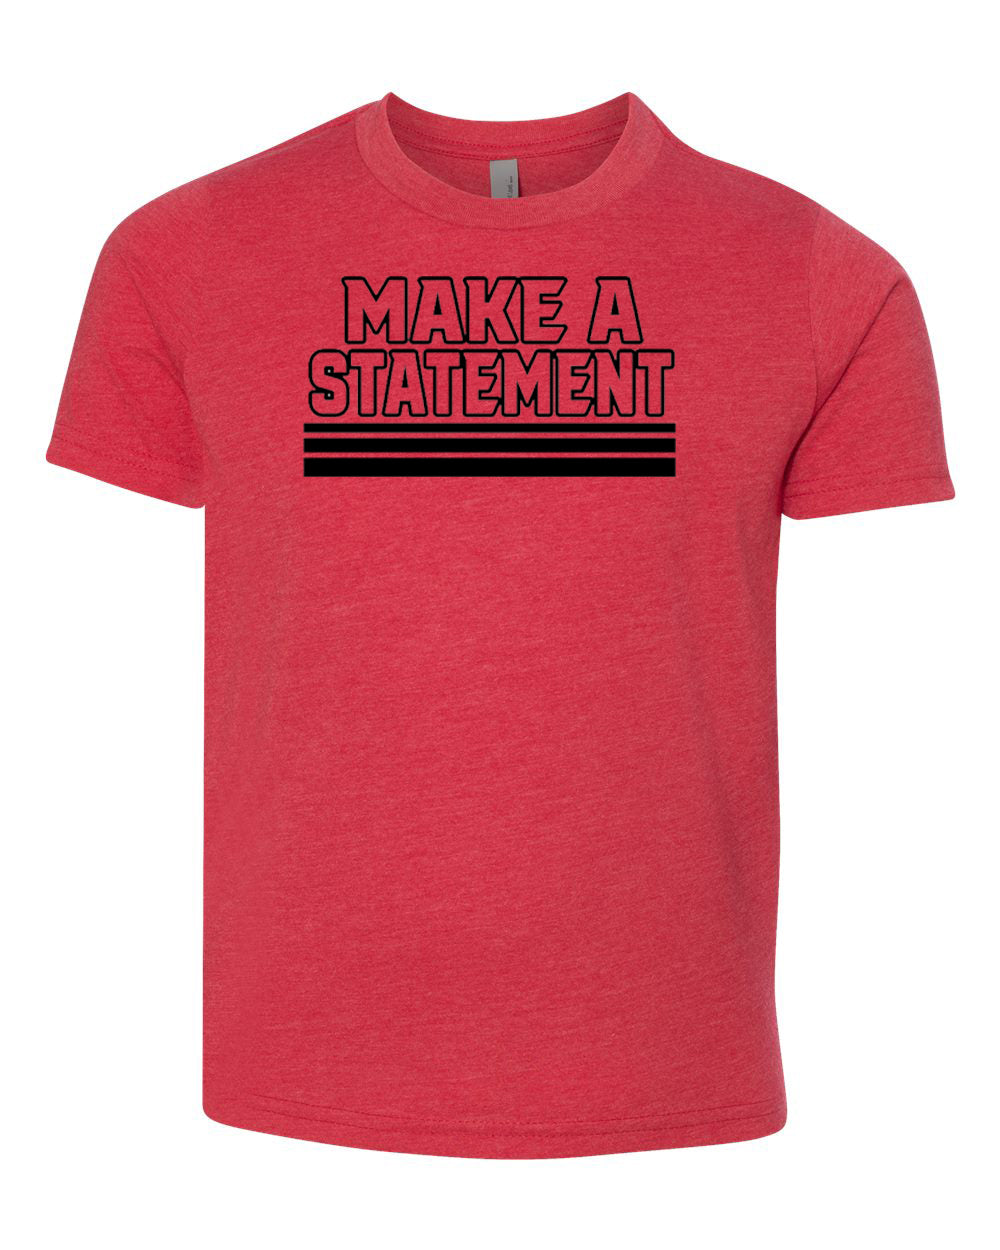 Make A Statement Youth T-Shirt Red